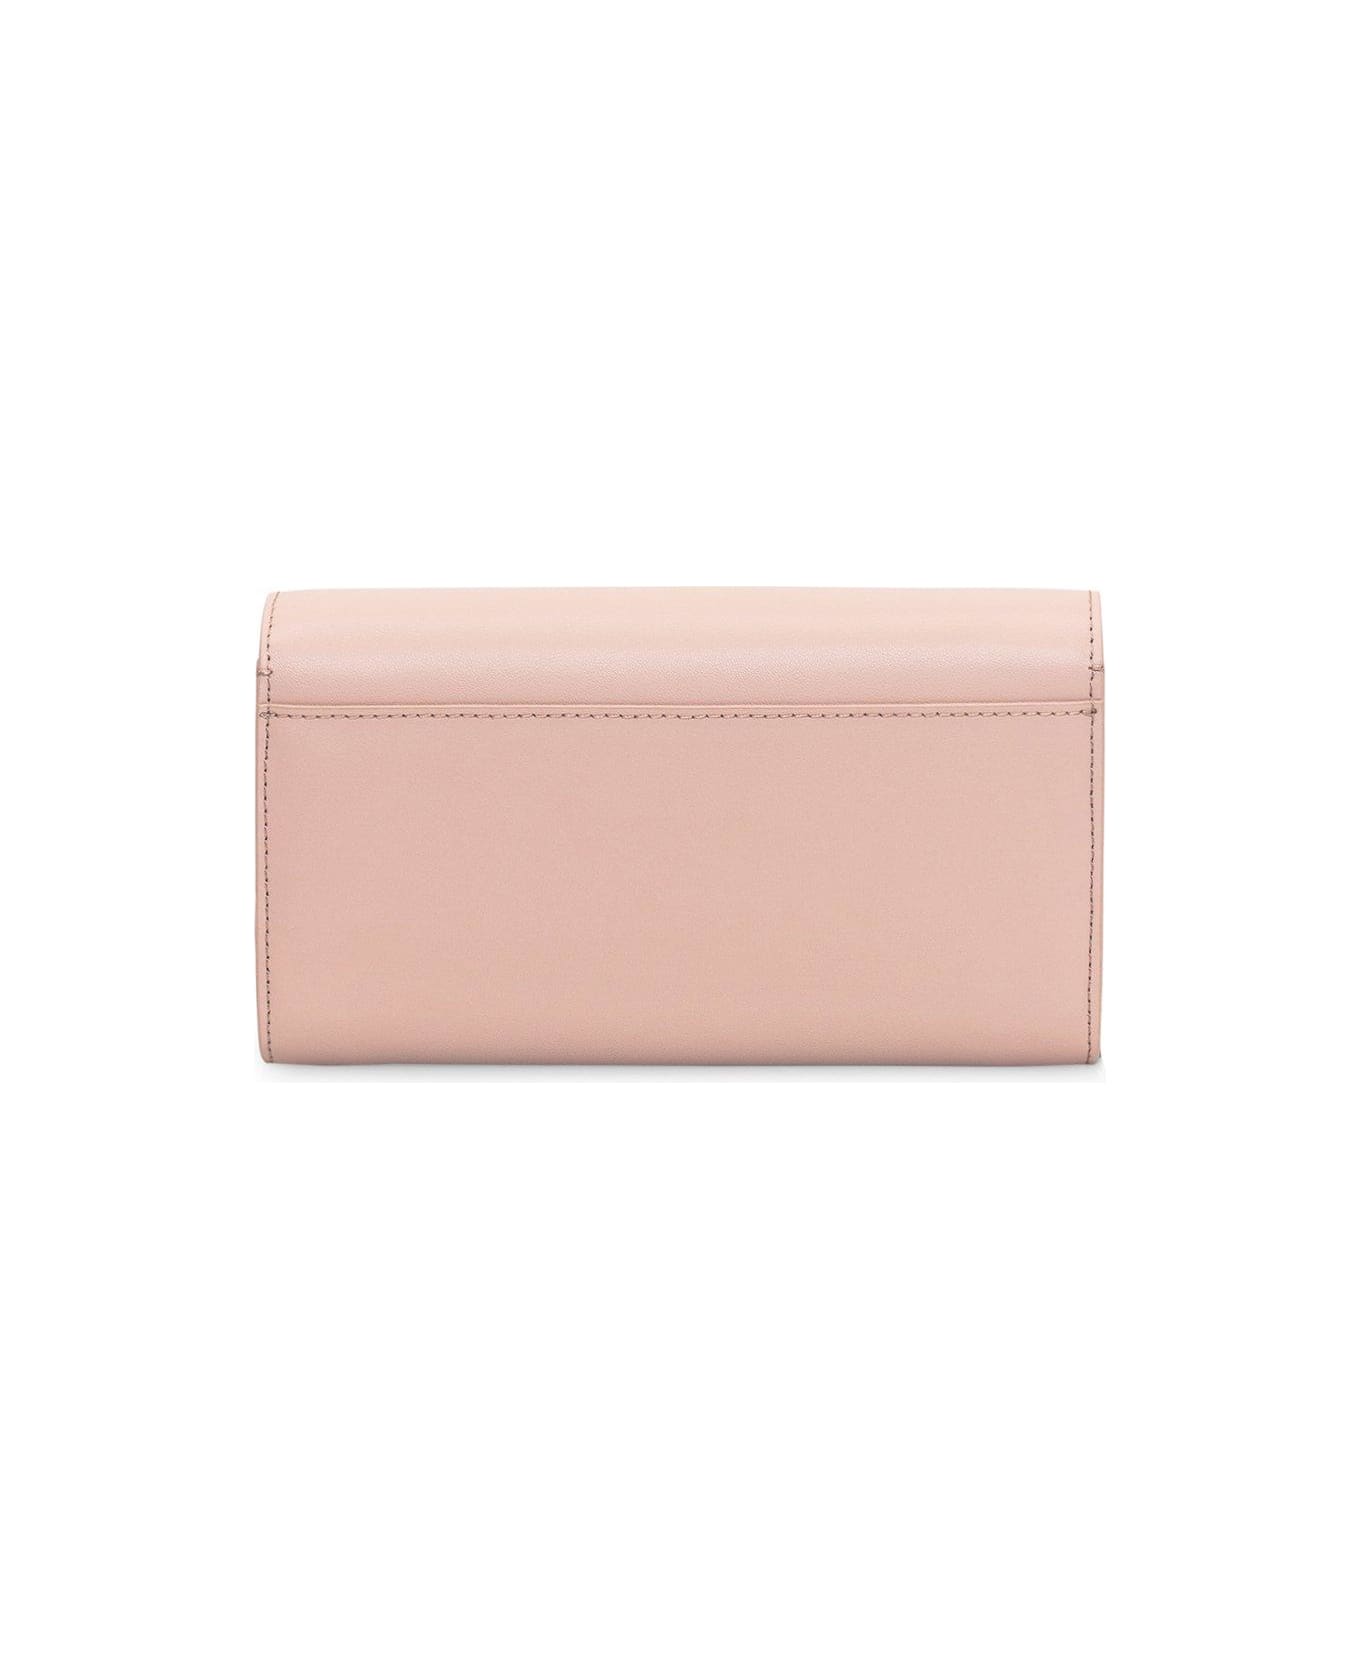 Pinko Love One Wallet - Pink クラッチバッグ